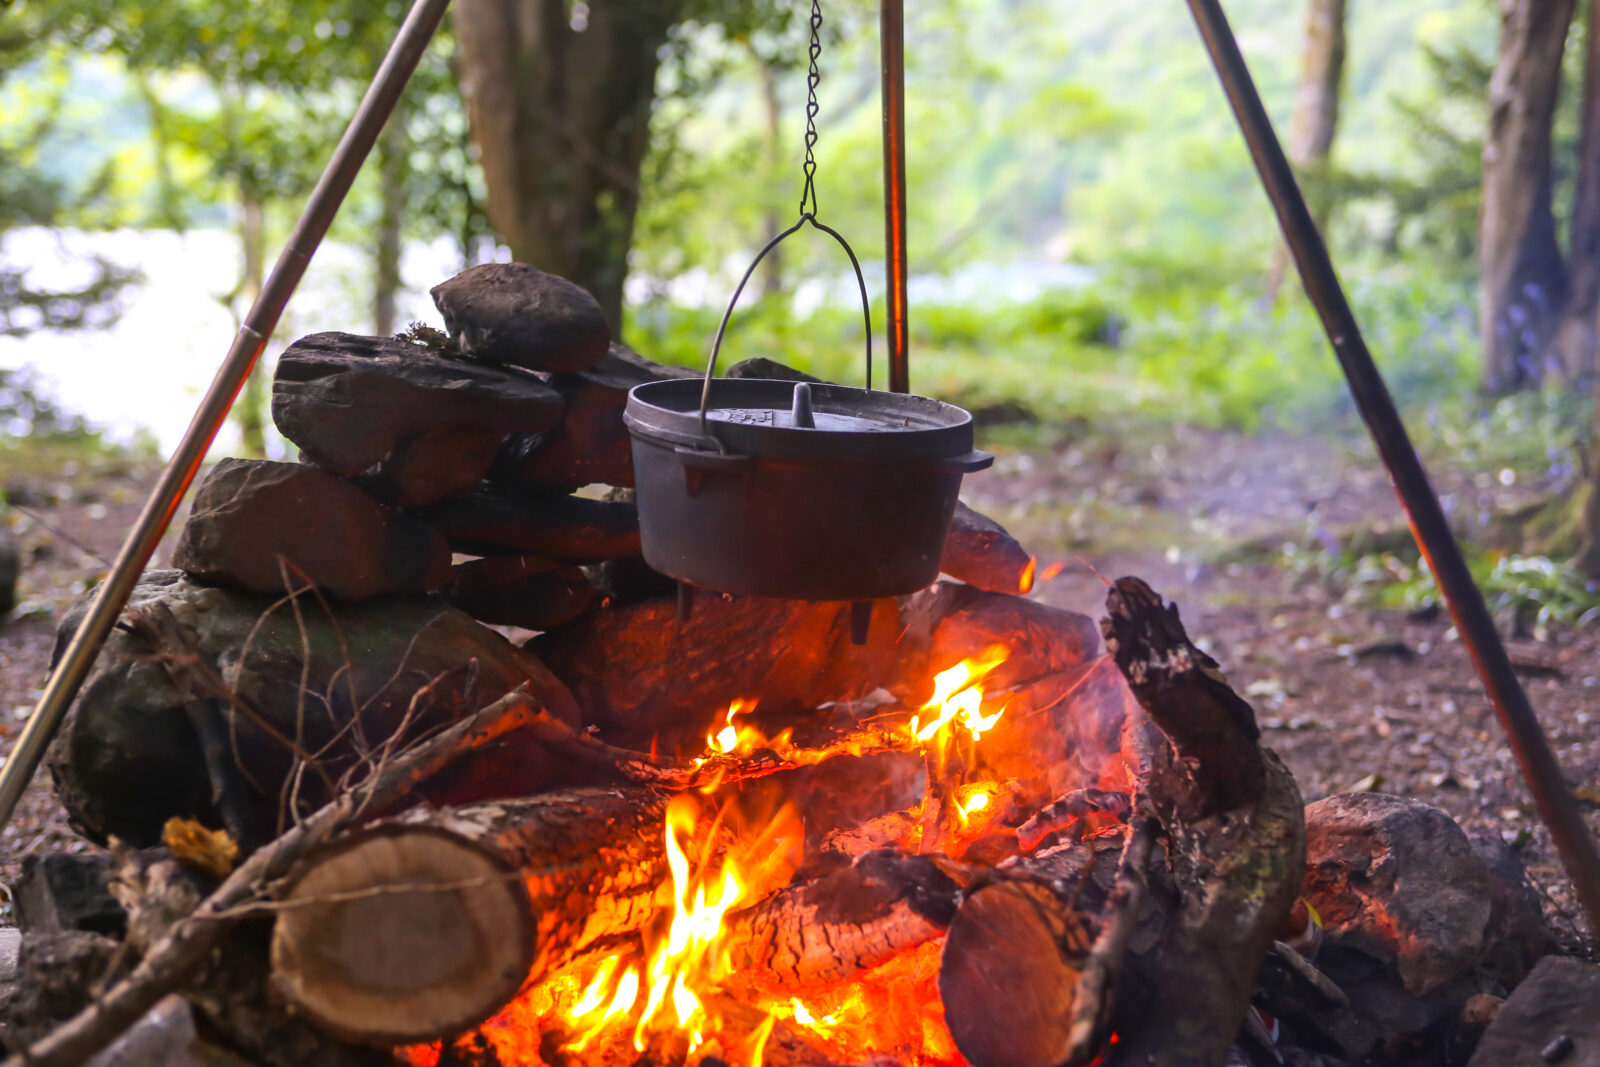 Camping Dutch Ovens 1